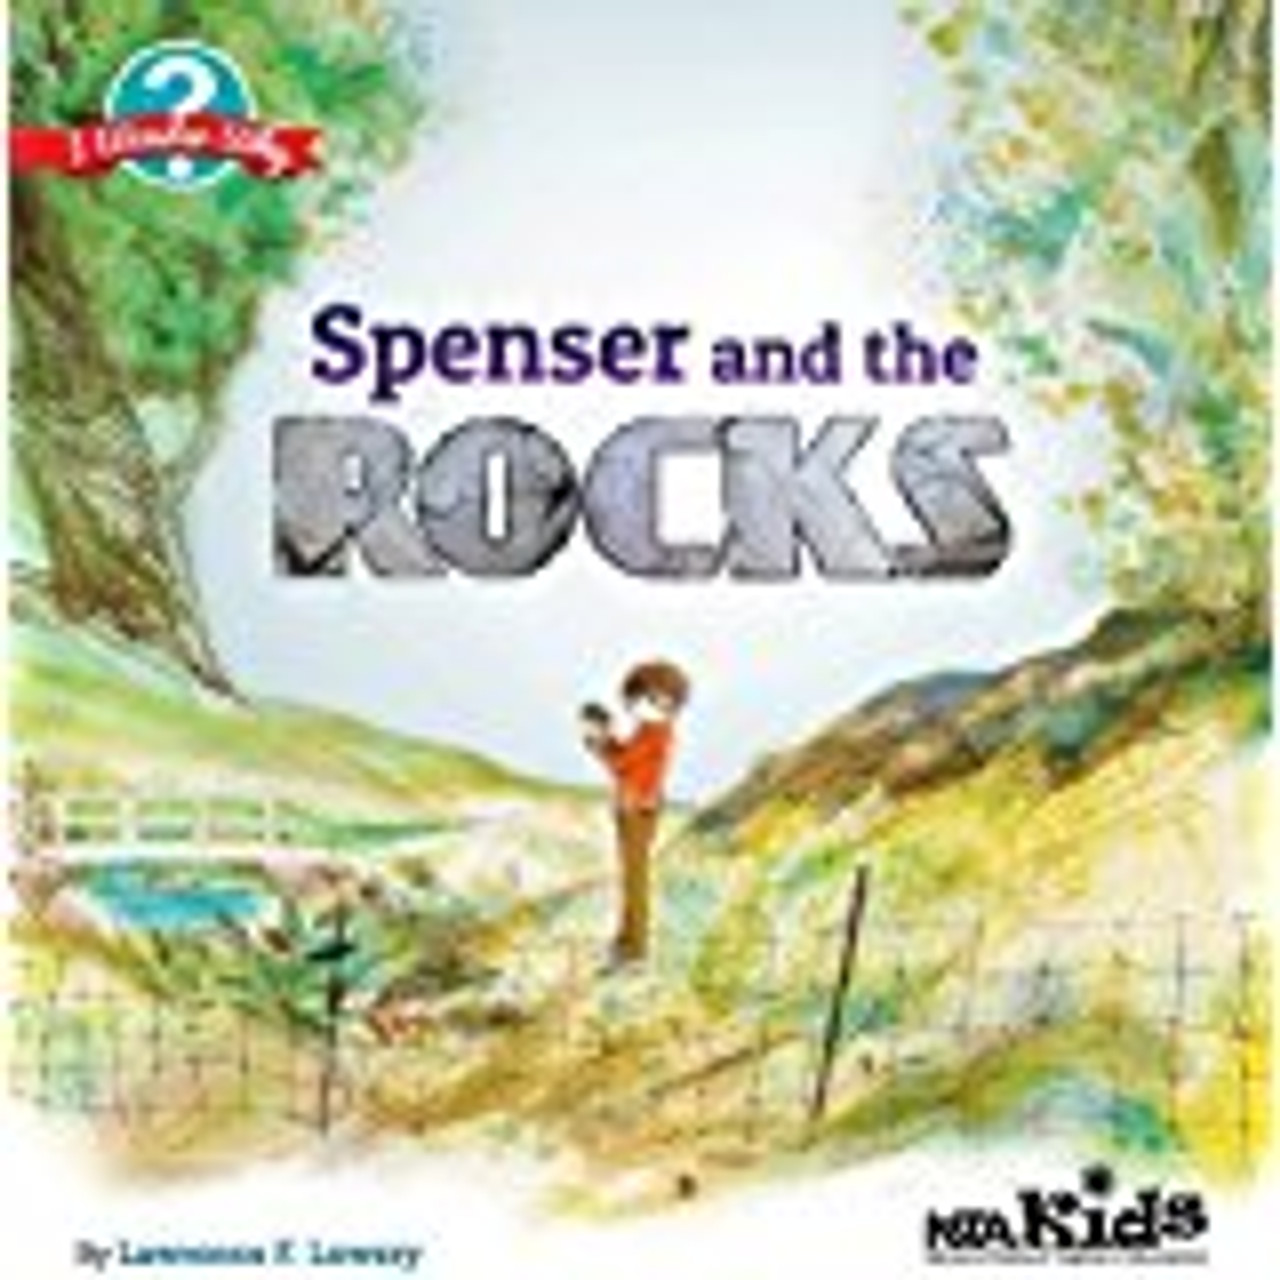 <p>Spenser and the rocks is part of the I Wonder Why book series, written to ignite the curiosity of children in grades K-6 while encouraging them to become avid readers. In addition to the information pertaining to rocks, the heart of the story is a young boy named Spenser and his interests, curiosity, and thoughts. Through the story, the reader is introduced to scientific procedures such as classification, research, and reclassification. Spenser's interest in rocks increases as he learns more about them by sorting the rocks, asking questions, and reading reference books</p>